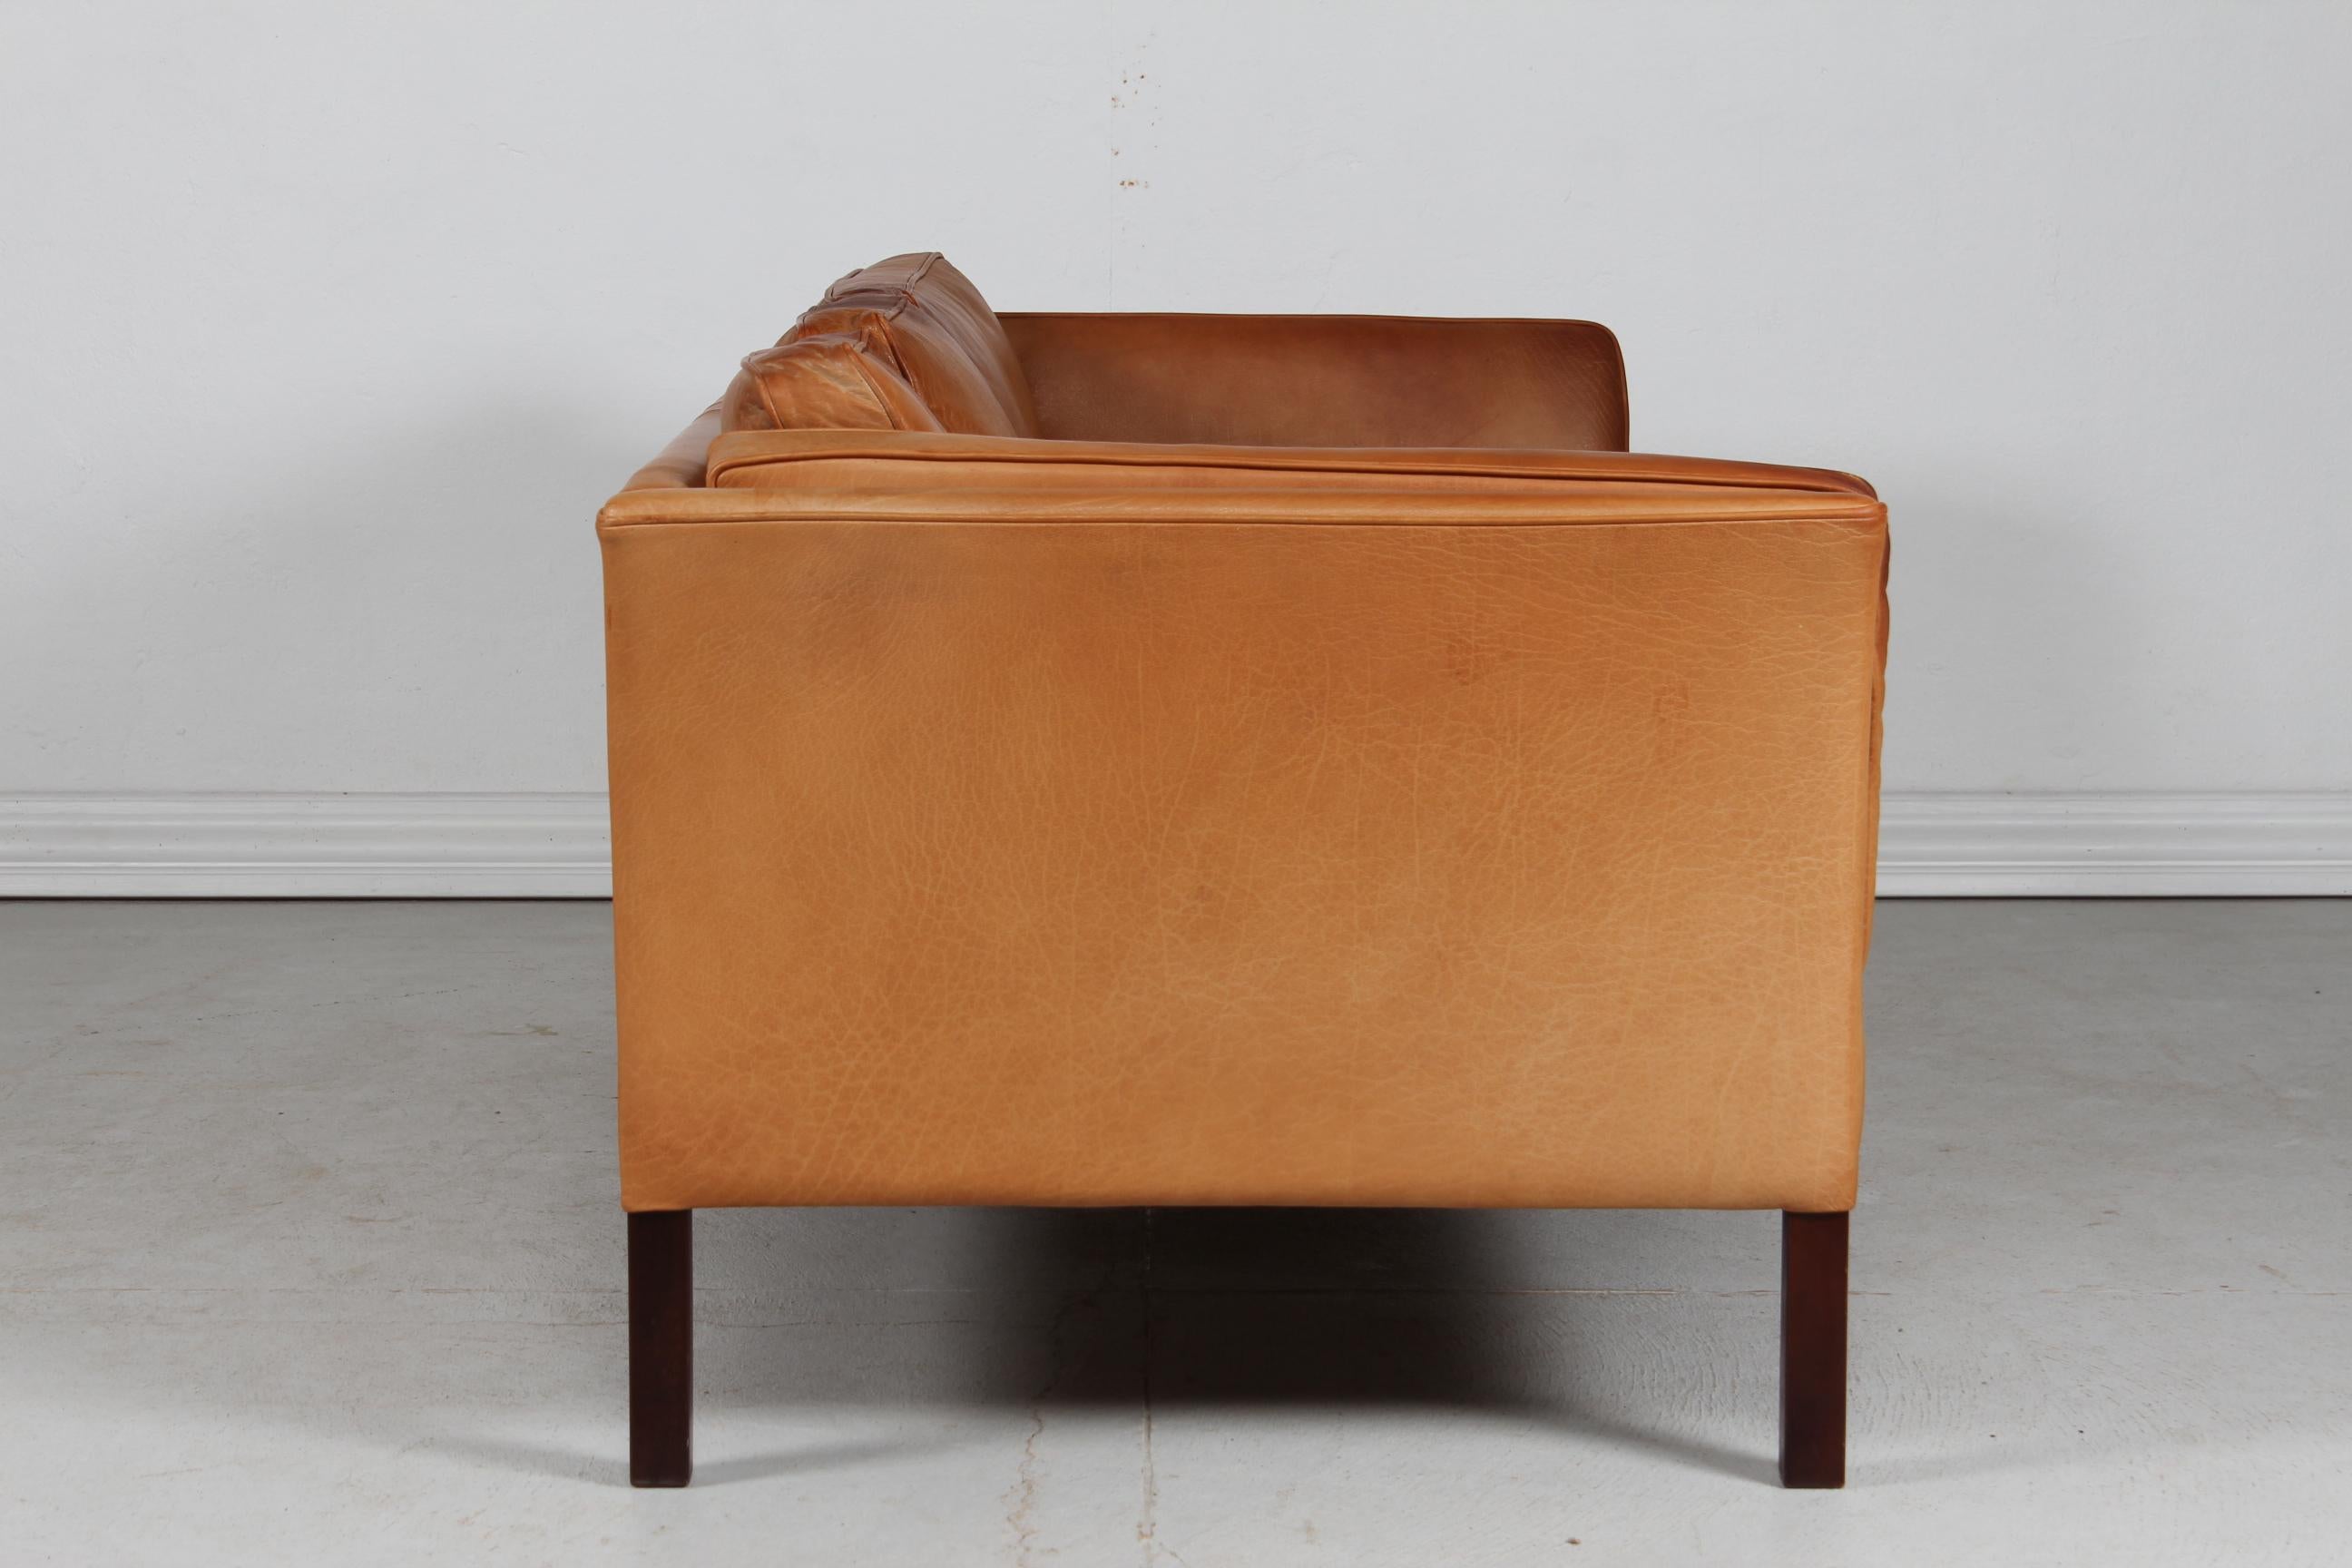 Danish Modern 3-Seat Sofa with Patinated Cognac-Colored Leather 1970s by Stouby 2